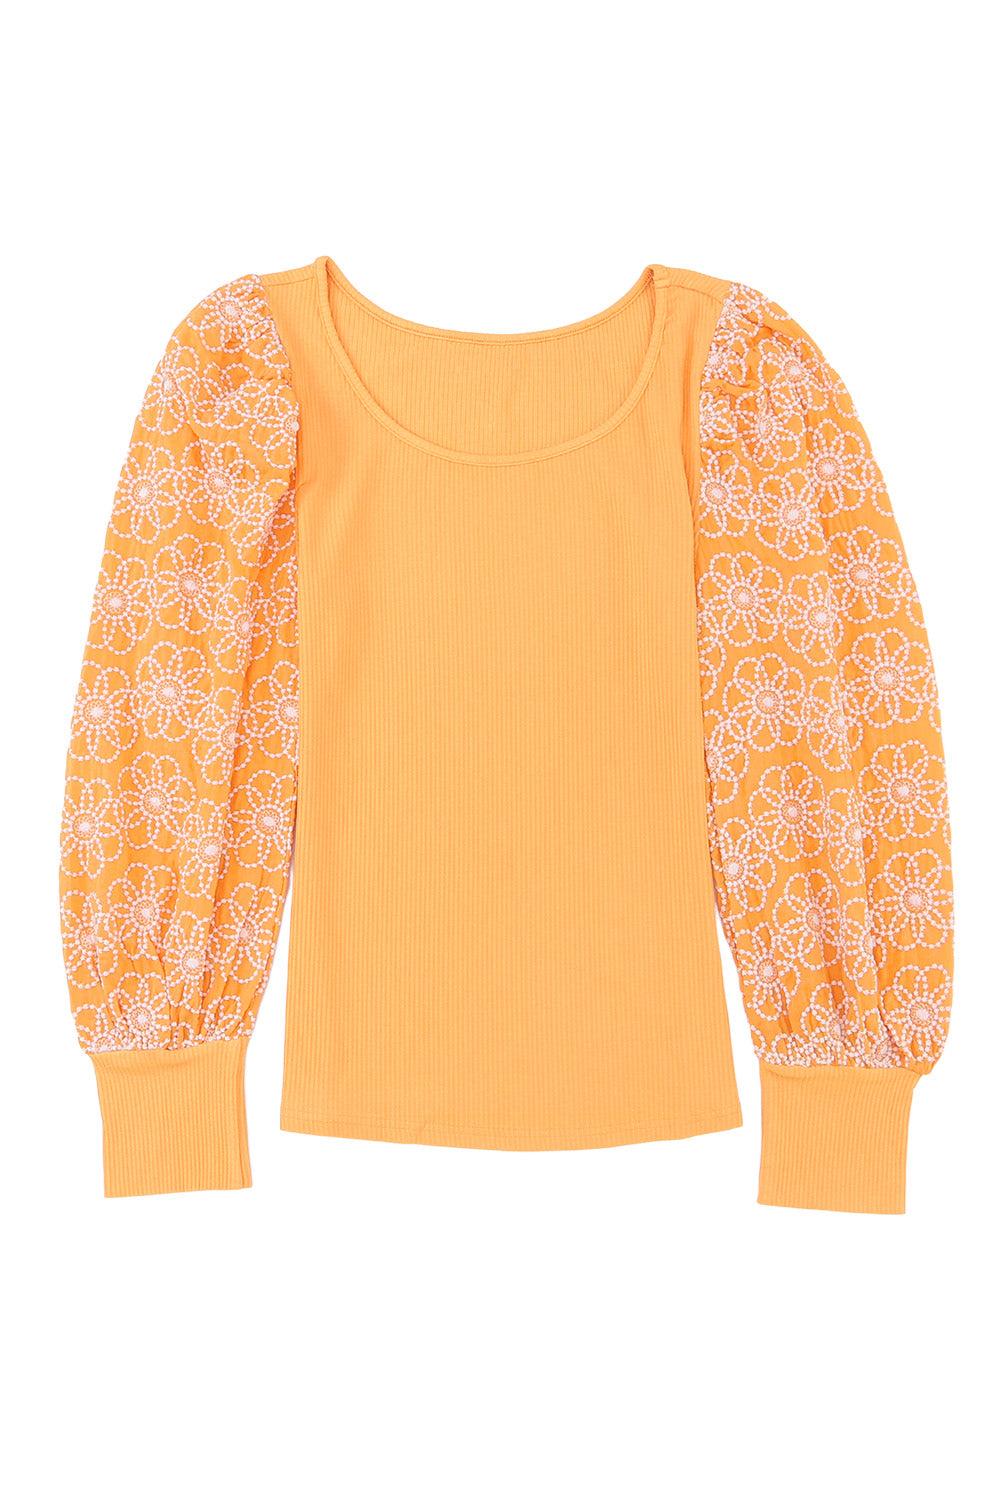 Women's Yellow Ribbed Knit Flower Patterned Bishop Sleeve Boho Top